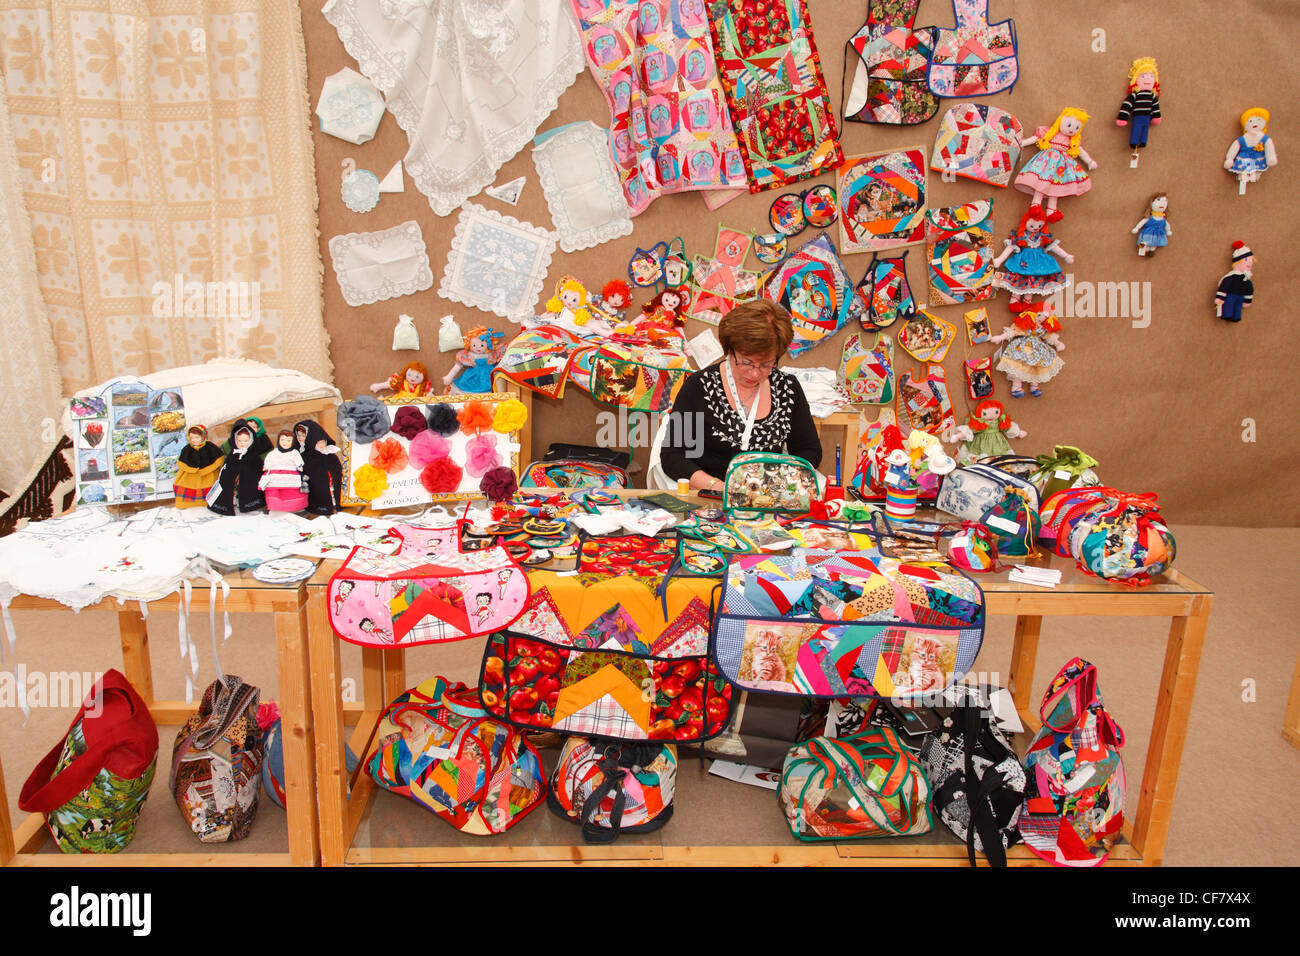 Azorean craftswoman surrounded by her works. Azores islands, Portugal. Stock Photo